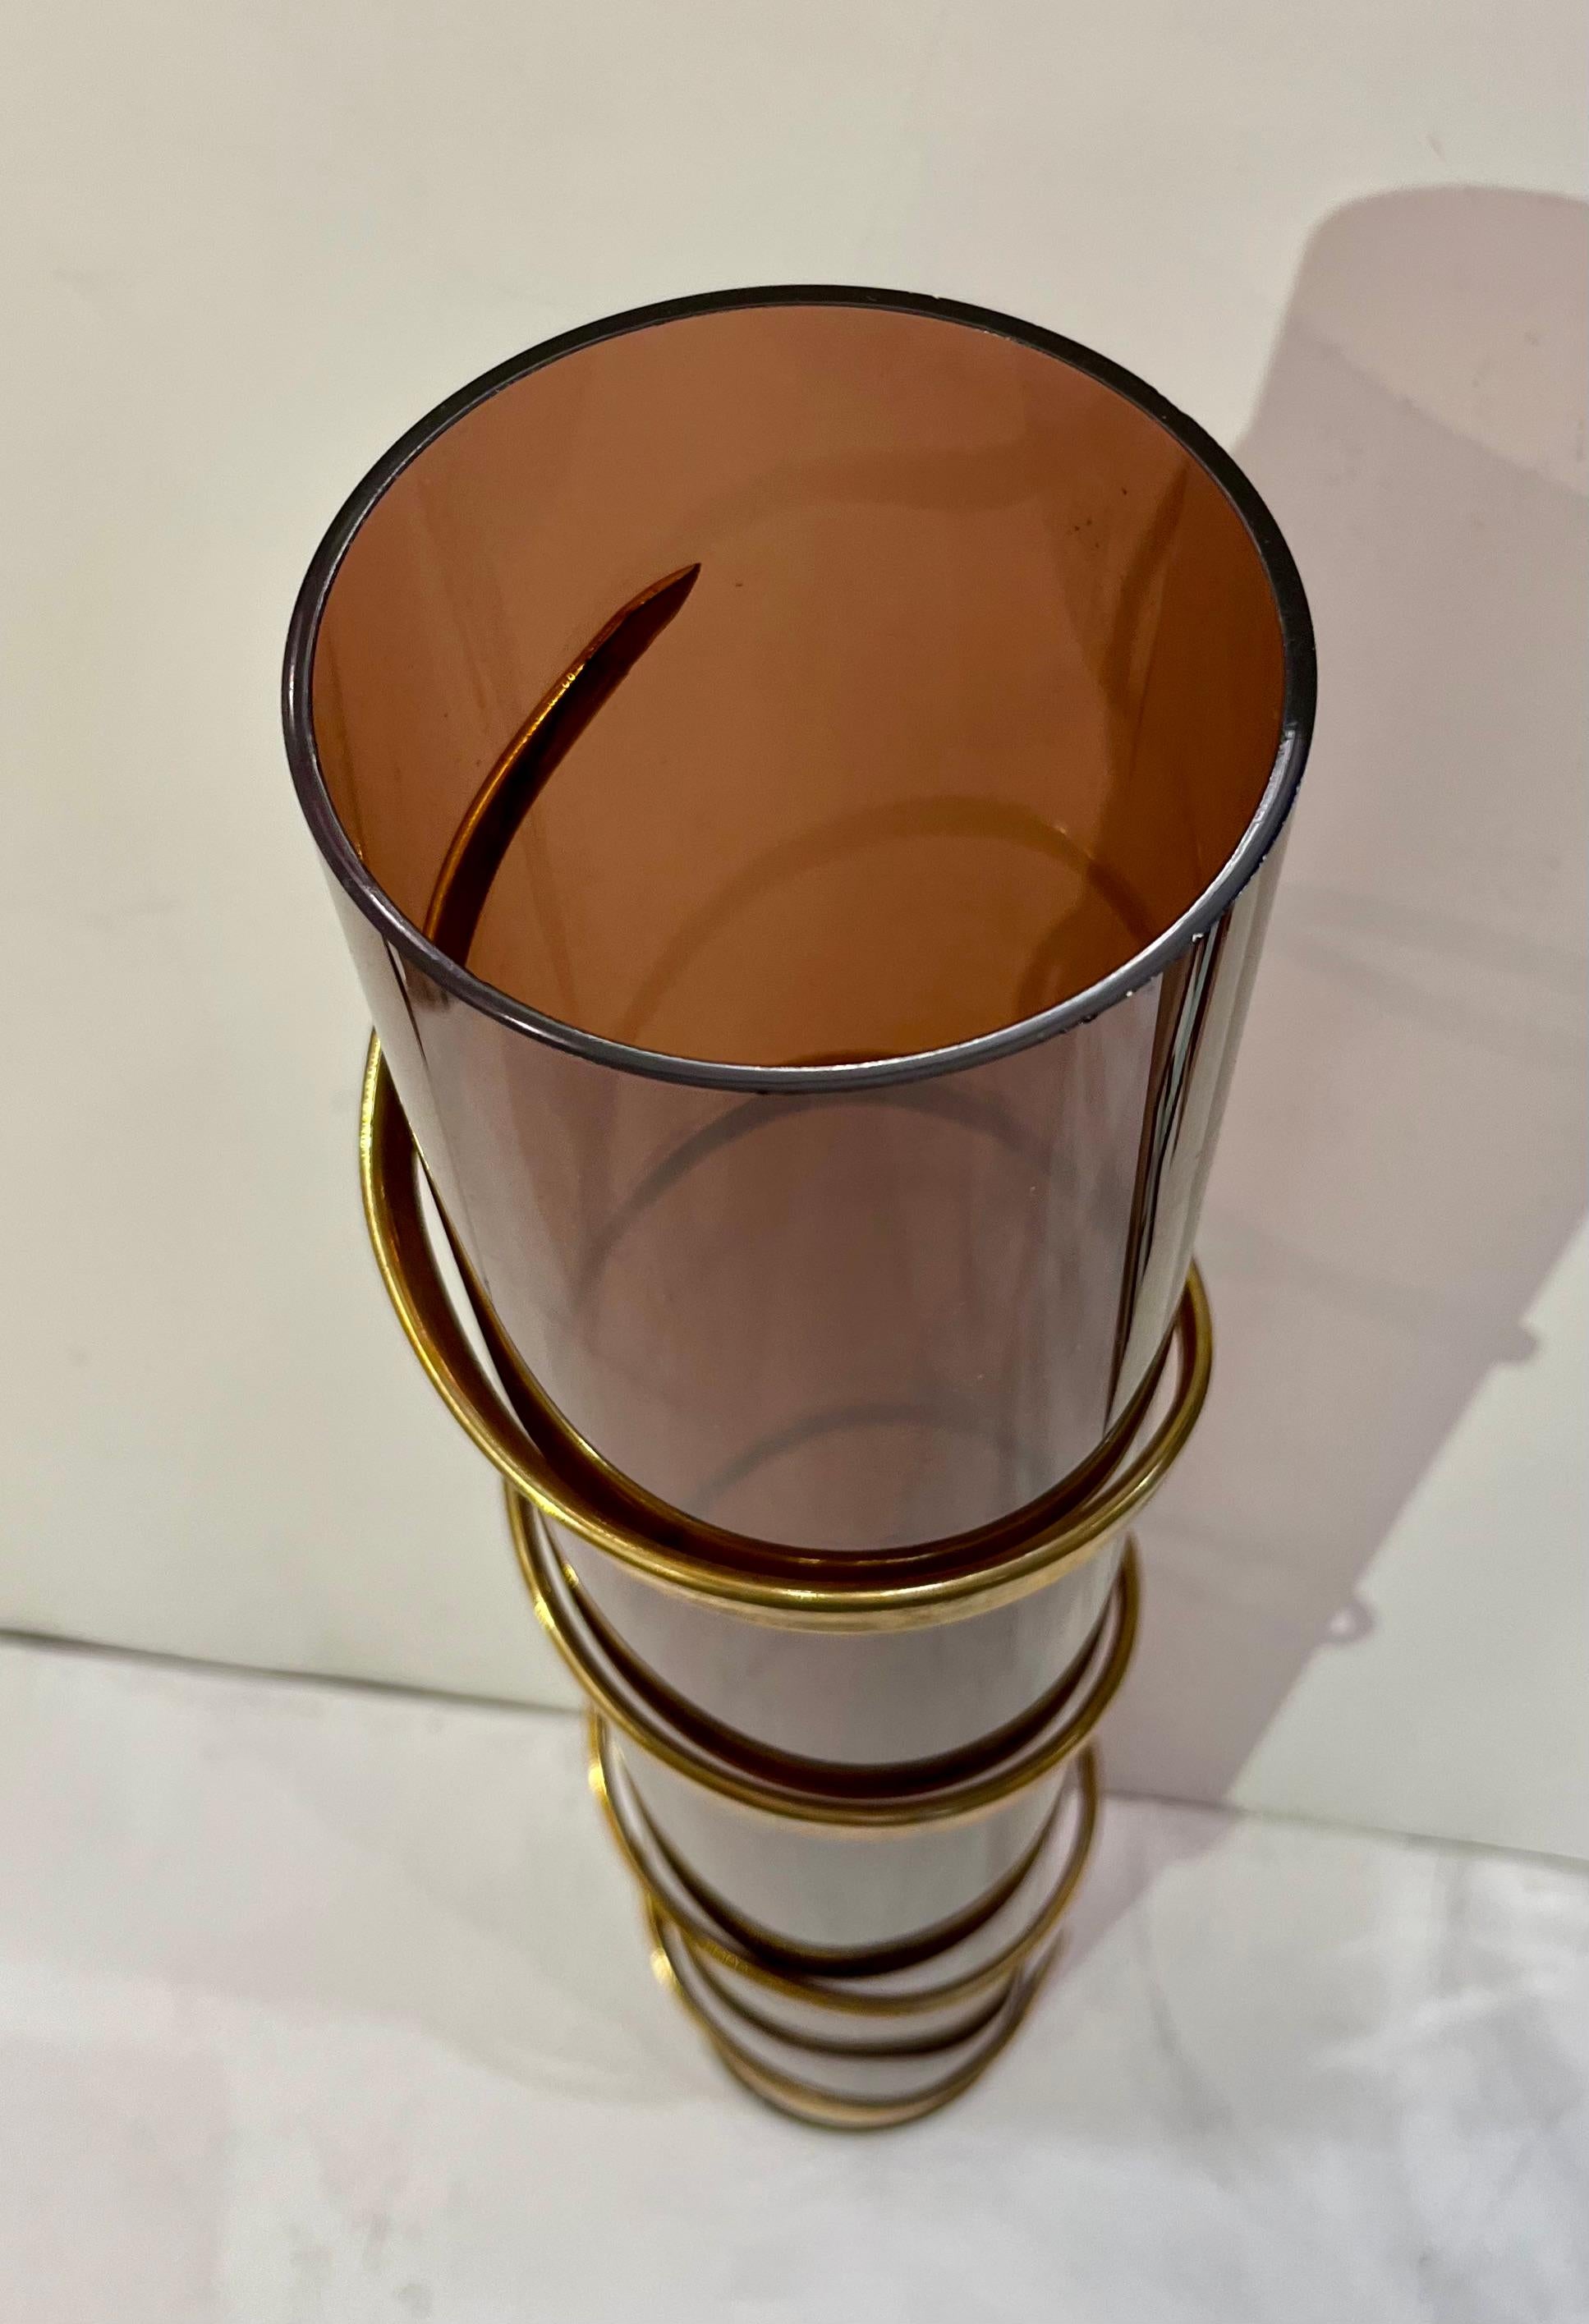 Vintage Mid-Century Modern Italian Design cylindrical sculpture vase, attributed to Romeo Rega, tall and slender, the organic body in transparent brown acrylic is decorated with a brass Egyptian style sinuous spiral on the outside, finishing with a